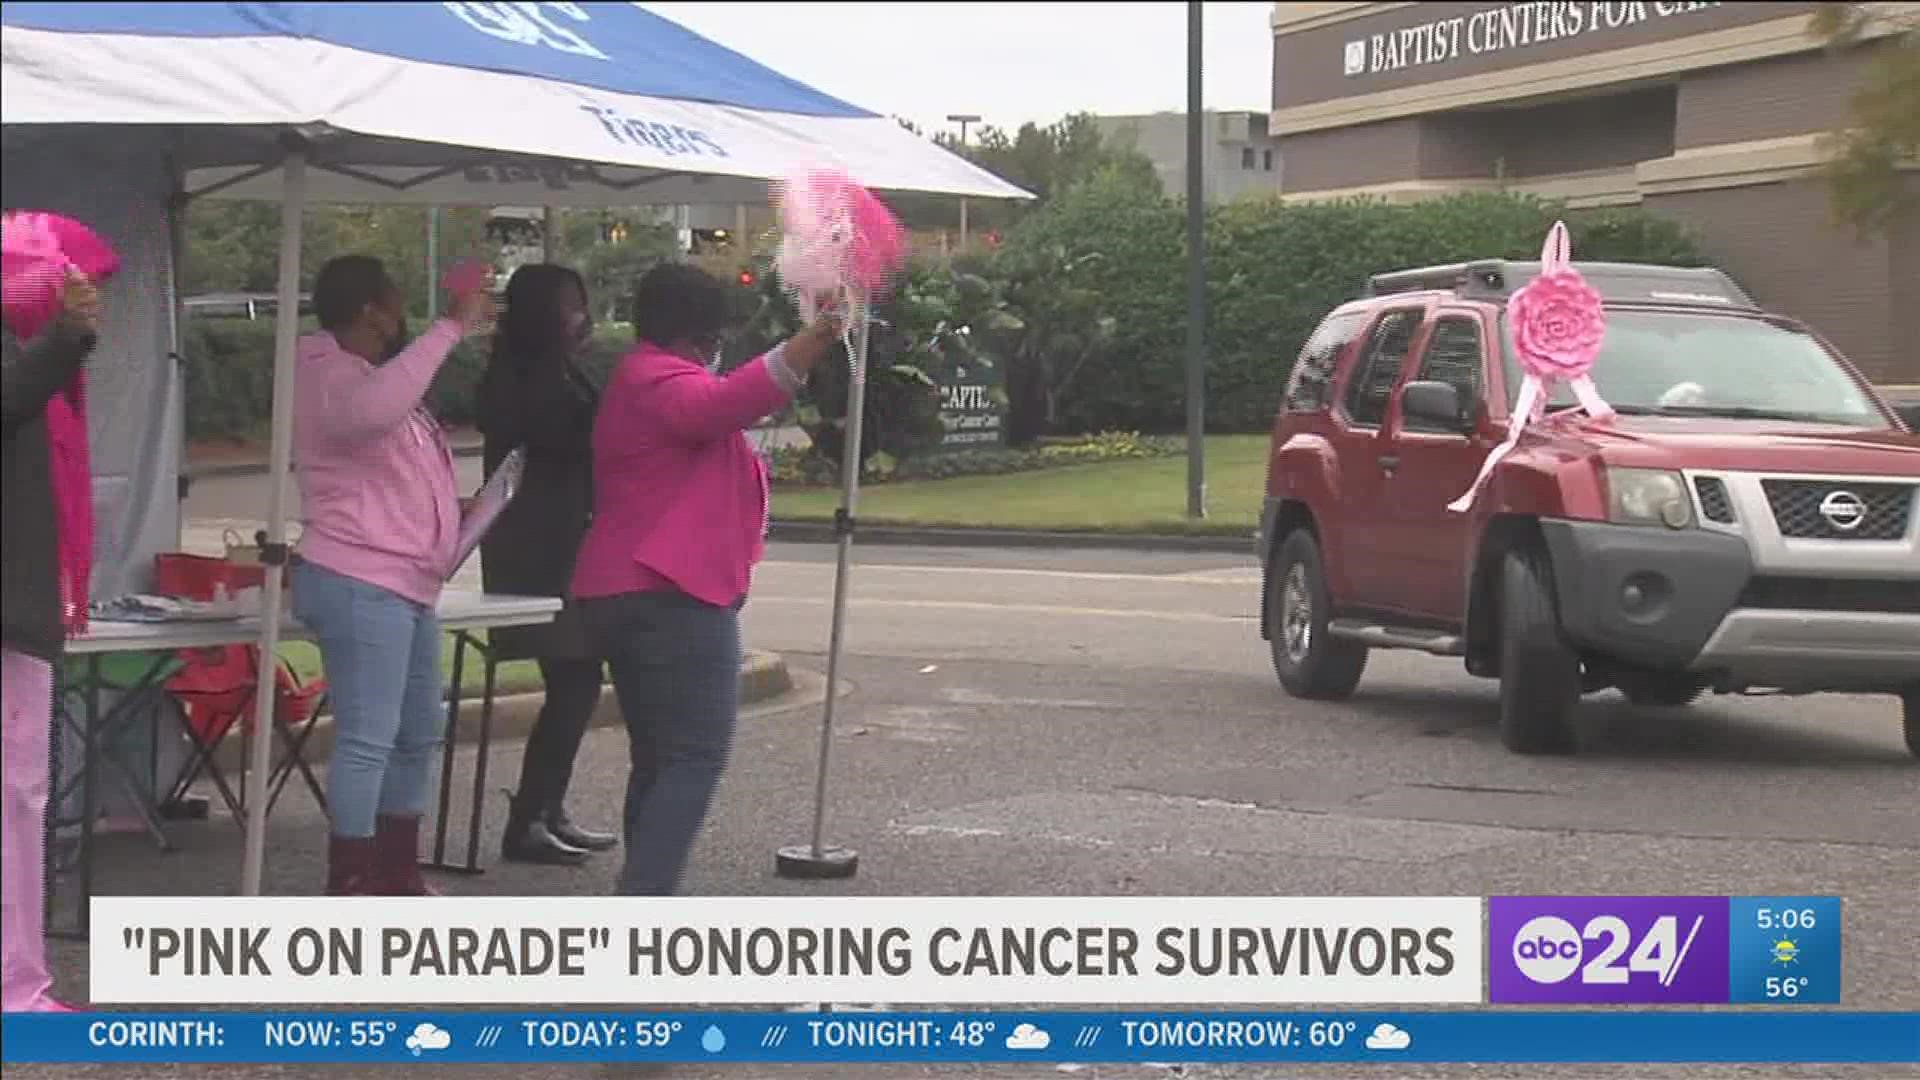 Baptist Women's Health Center hosted the "Pink on Parade" Friday morning as Breast Cancer Awareness Month nears an end.